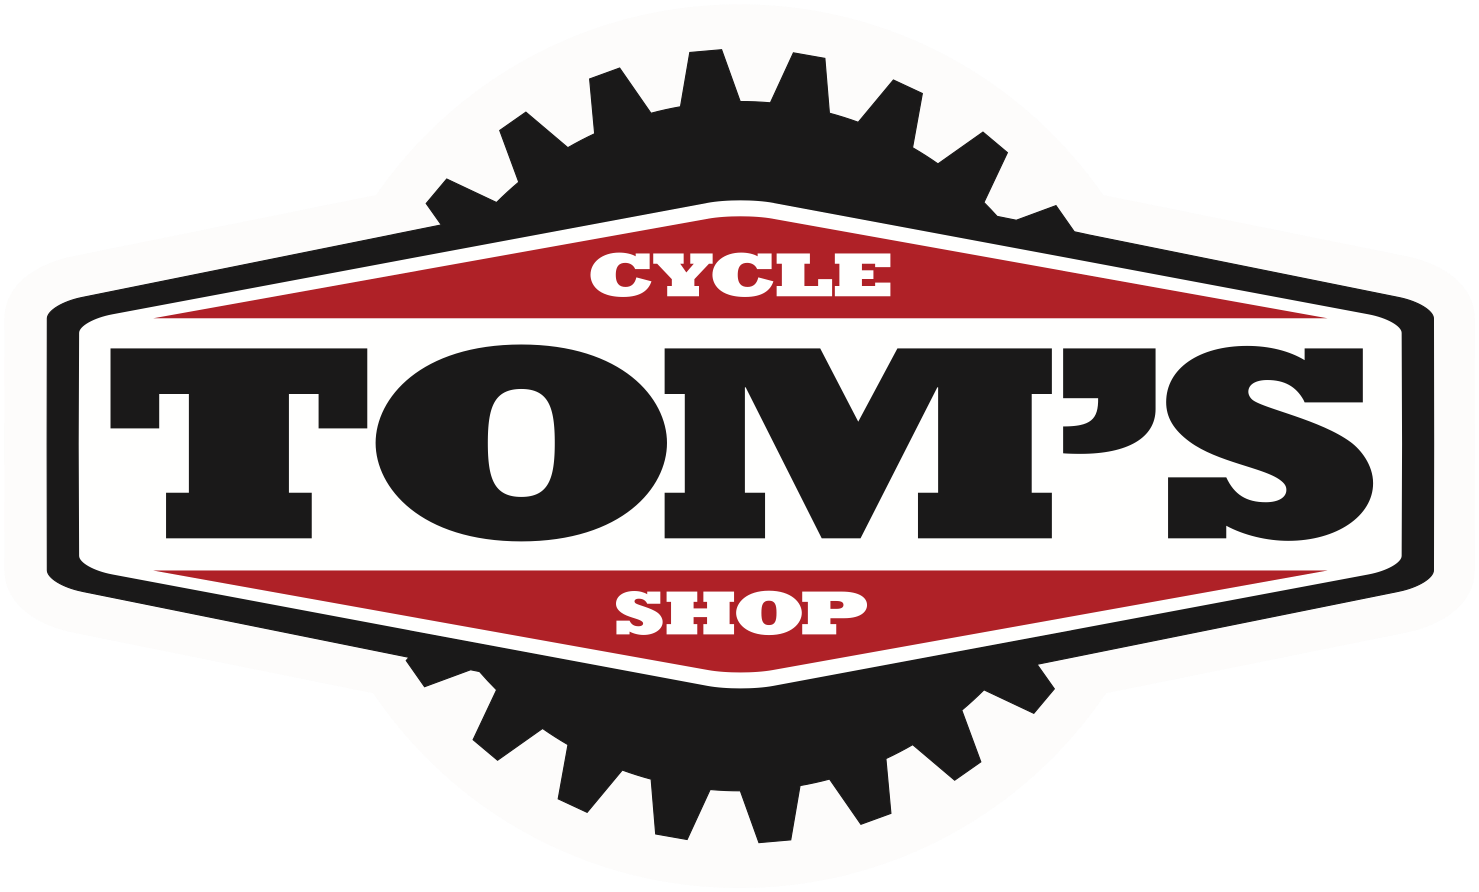 Tom’s Cycle Shop